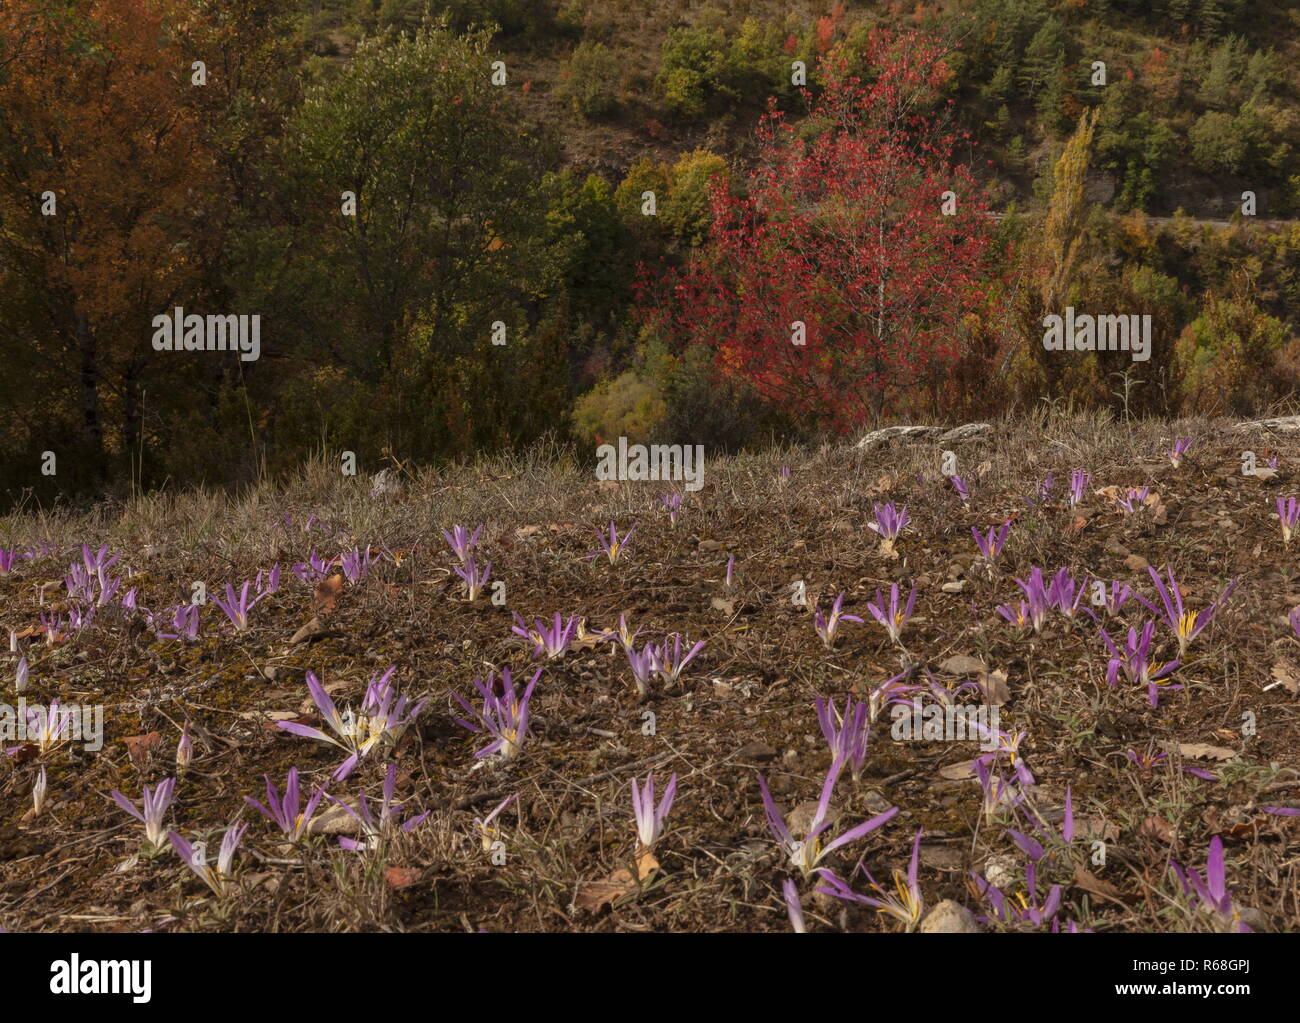 Pyrenean Merendera, Colchicum montanum, in flower in autumn in the Binies Gorge, with Montpelier Maple beyond; Spanish Pyrenees. Stock Photo